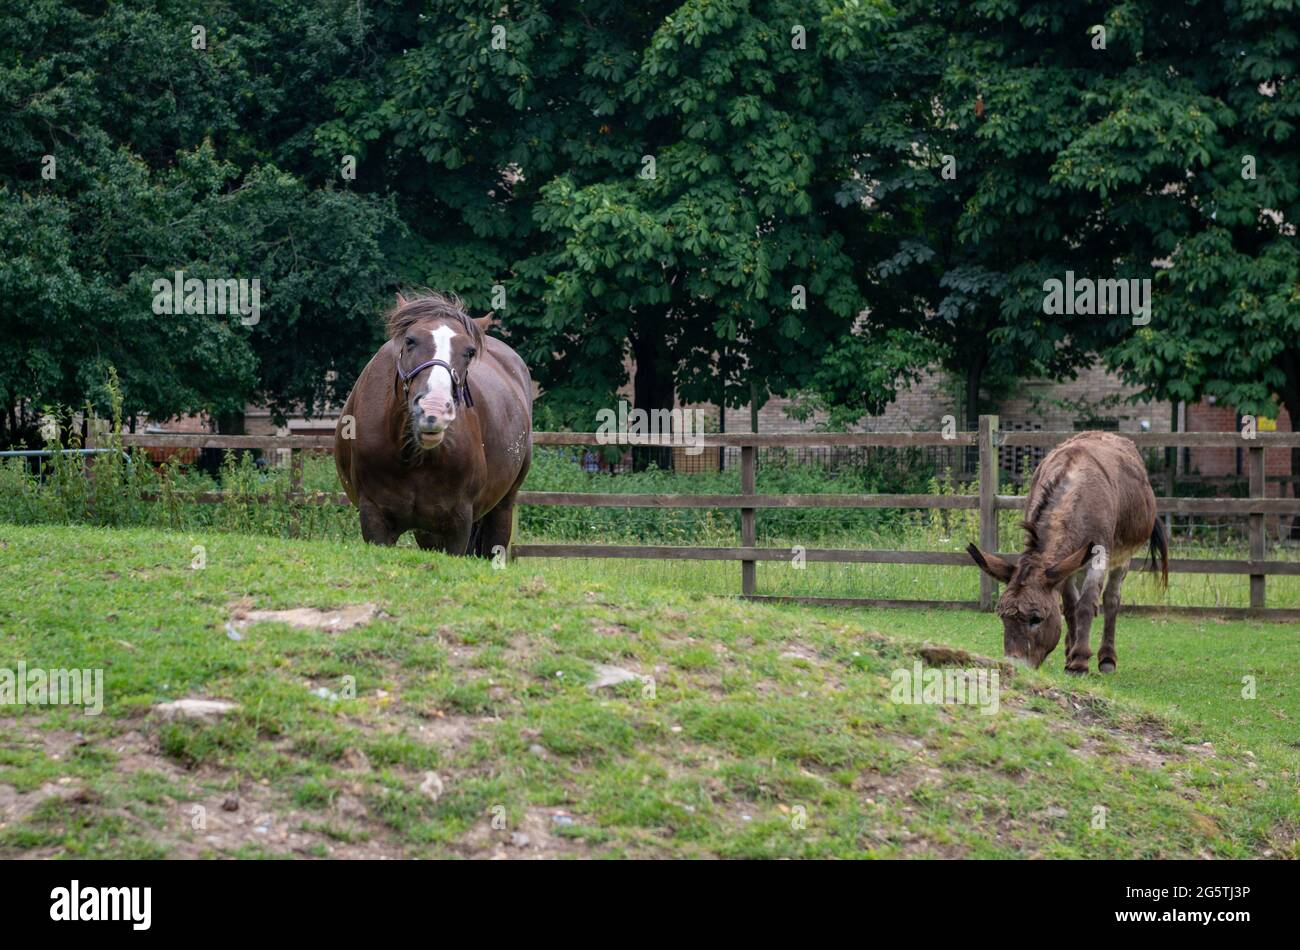 A horse and donkey grazing in the field of a farm. Stock Photo